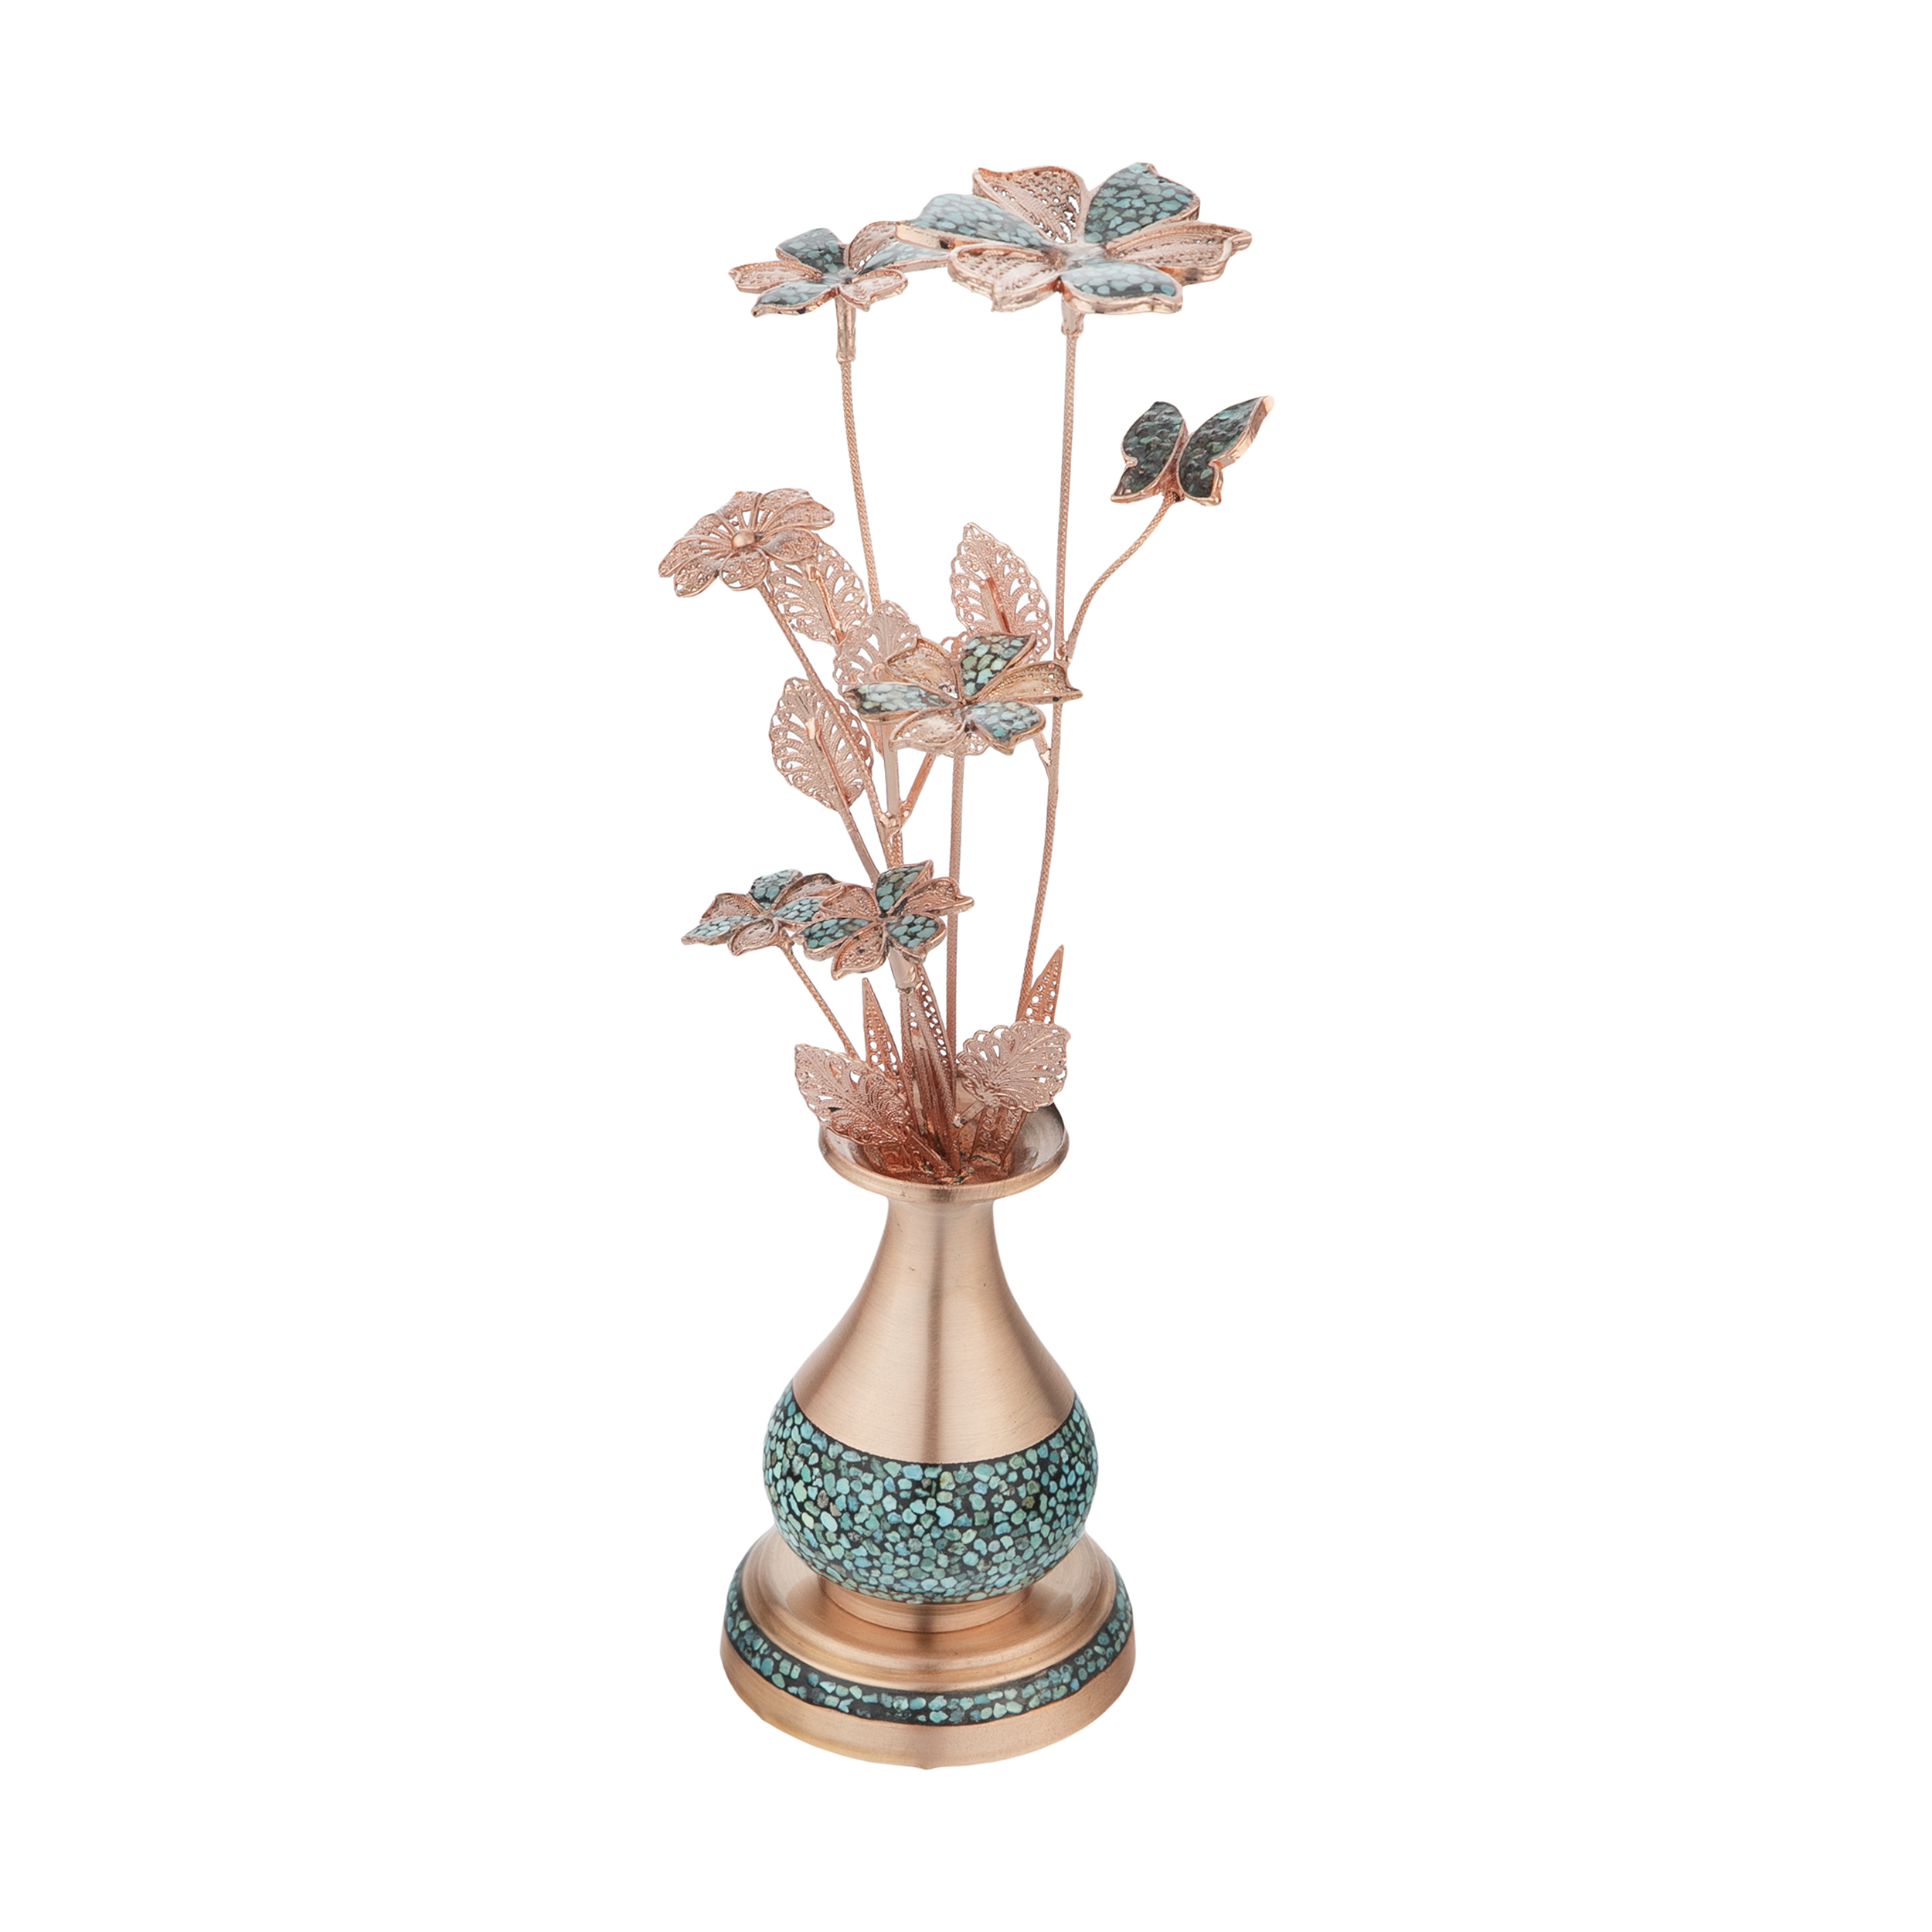 Set of turquoise flowers and vase, code 2